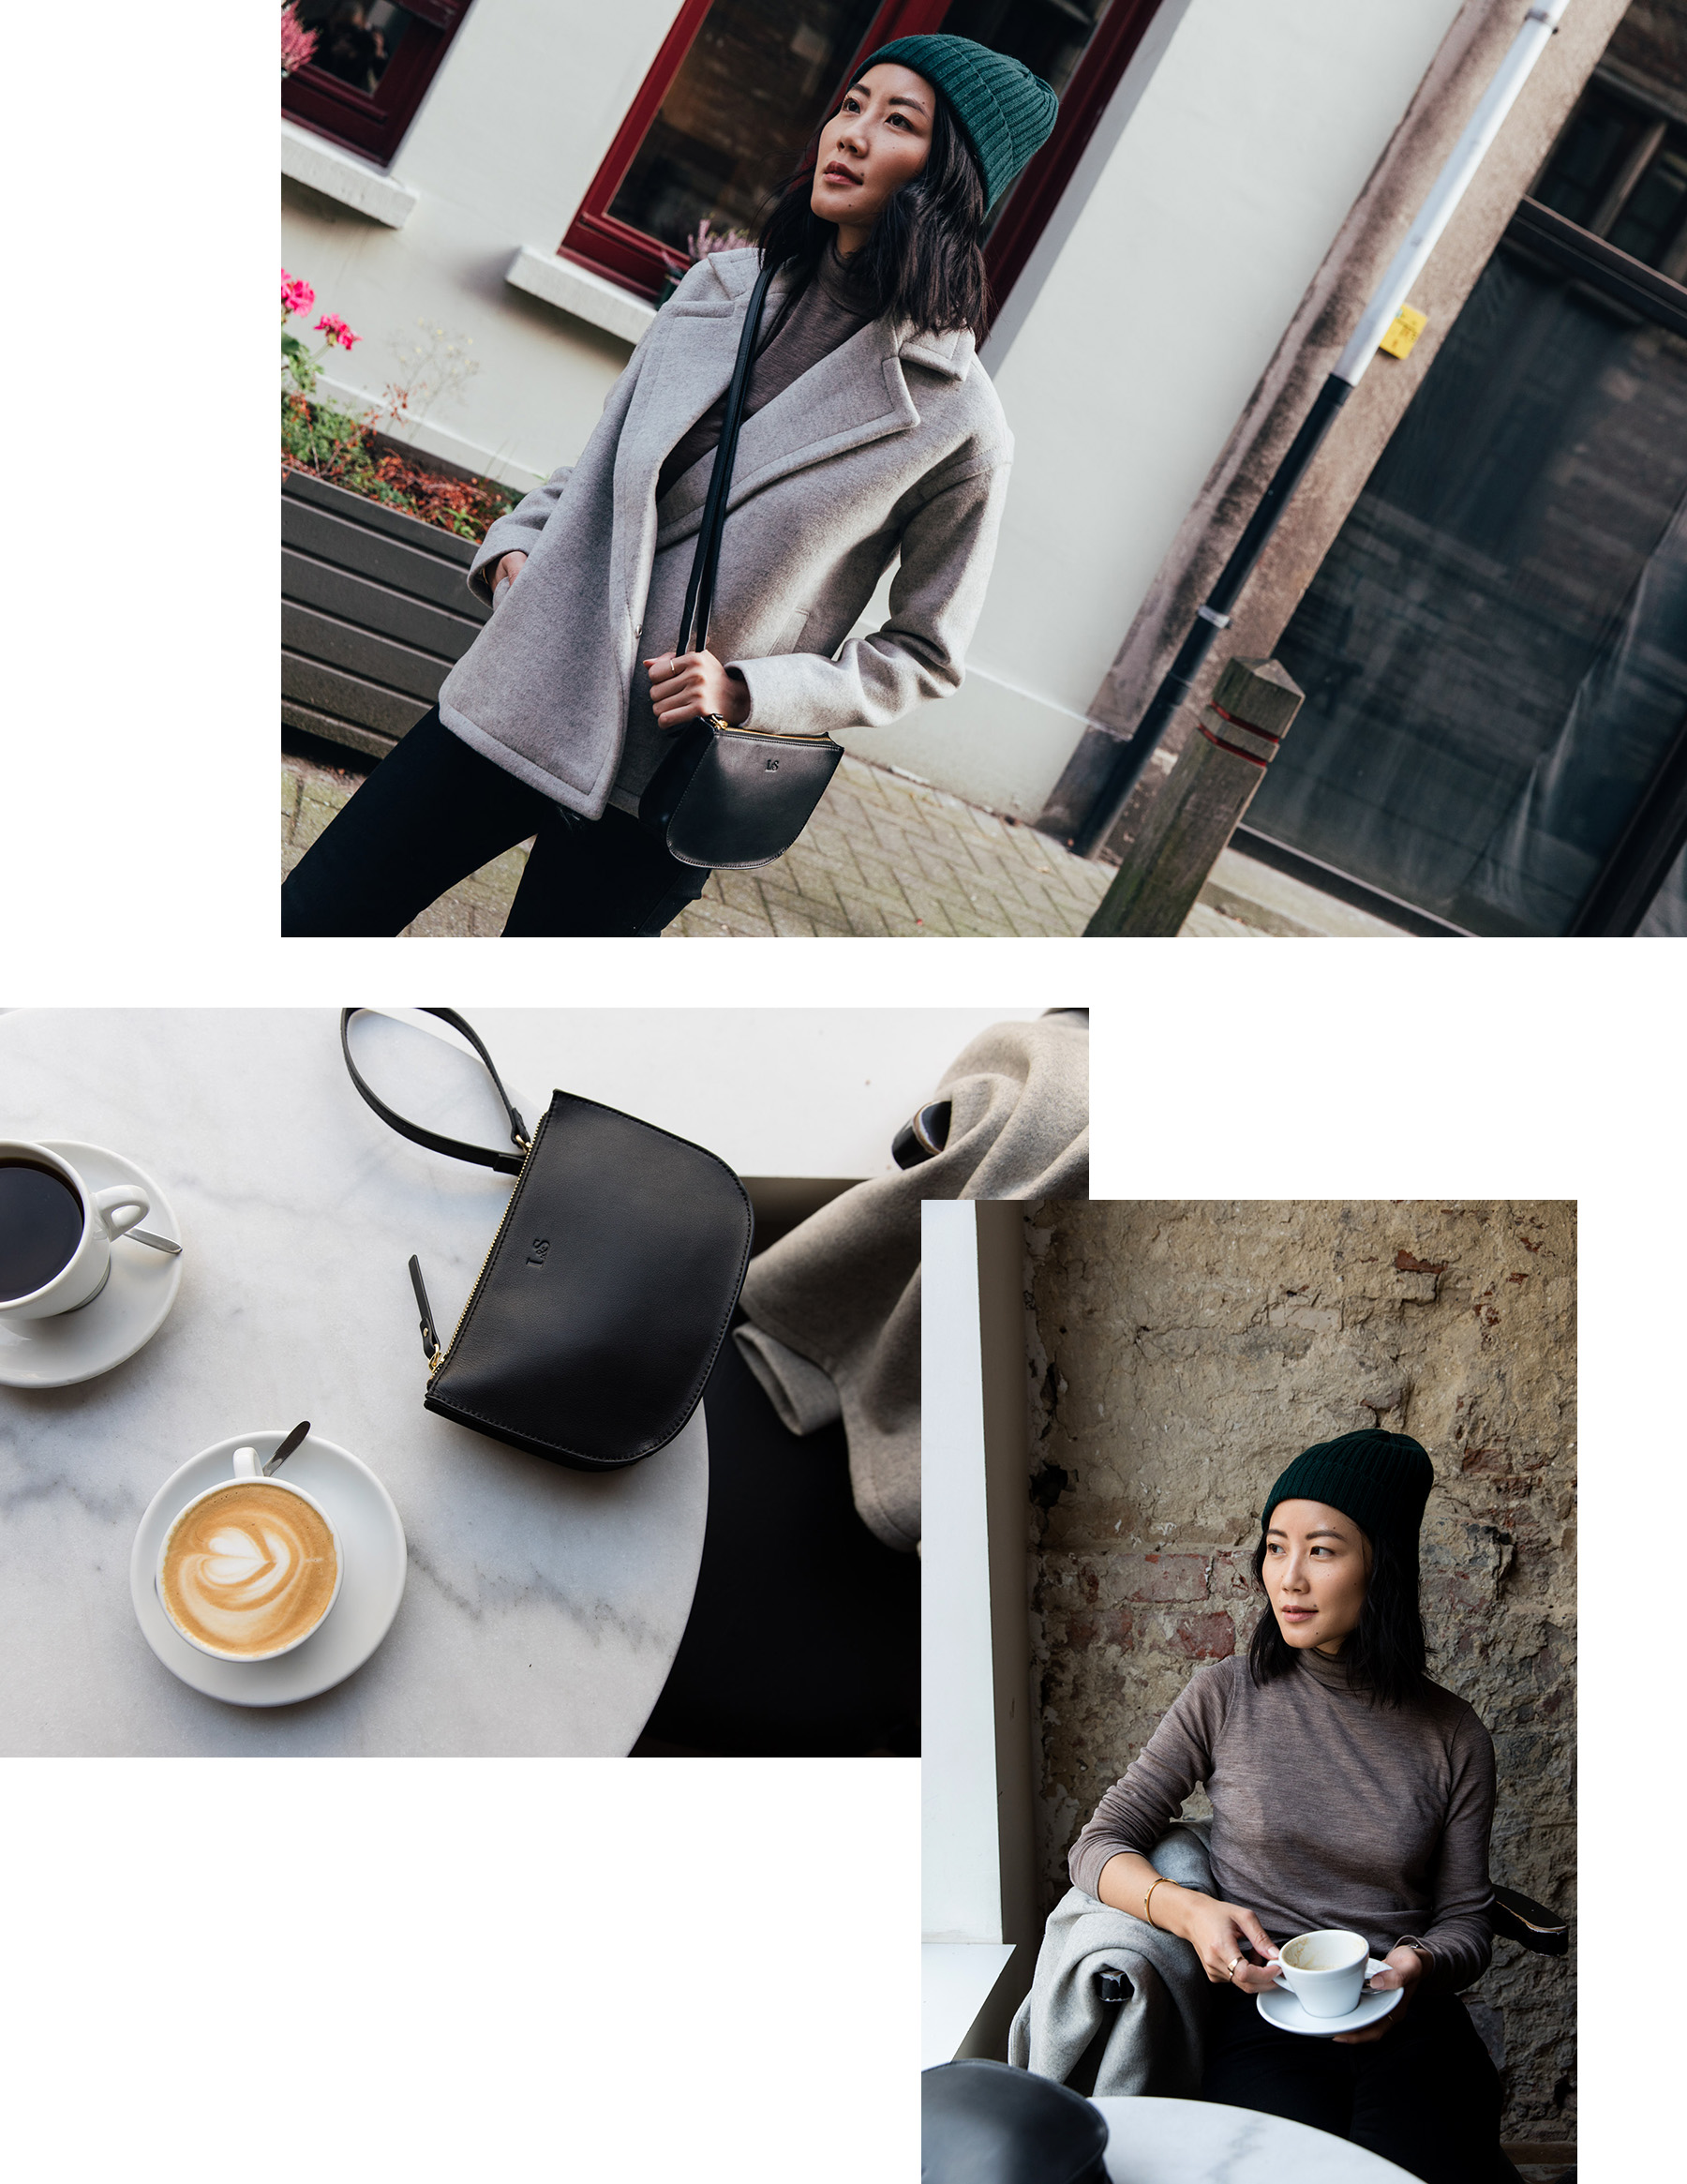 Neutral Fall Outfit Ideas - Jeans and a Teacup